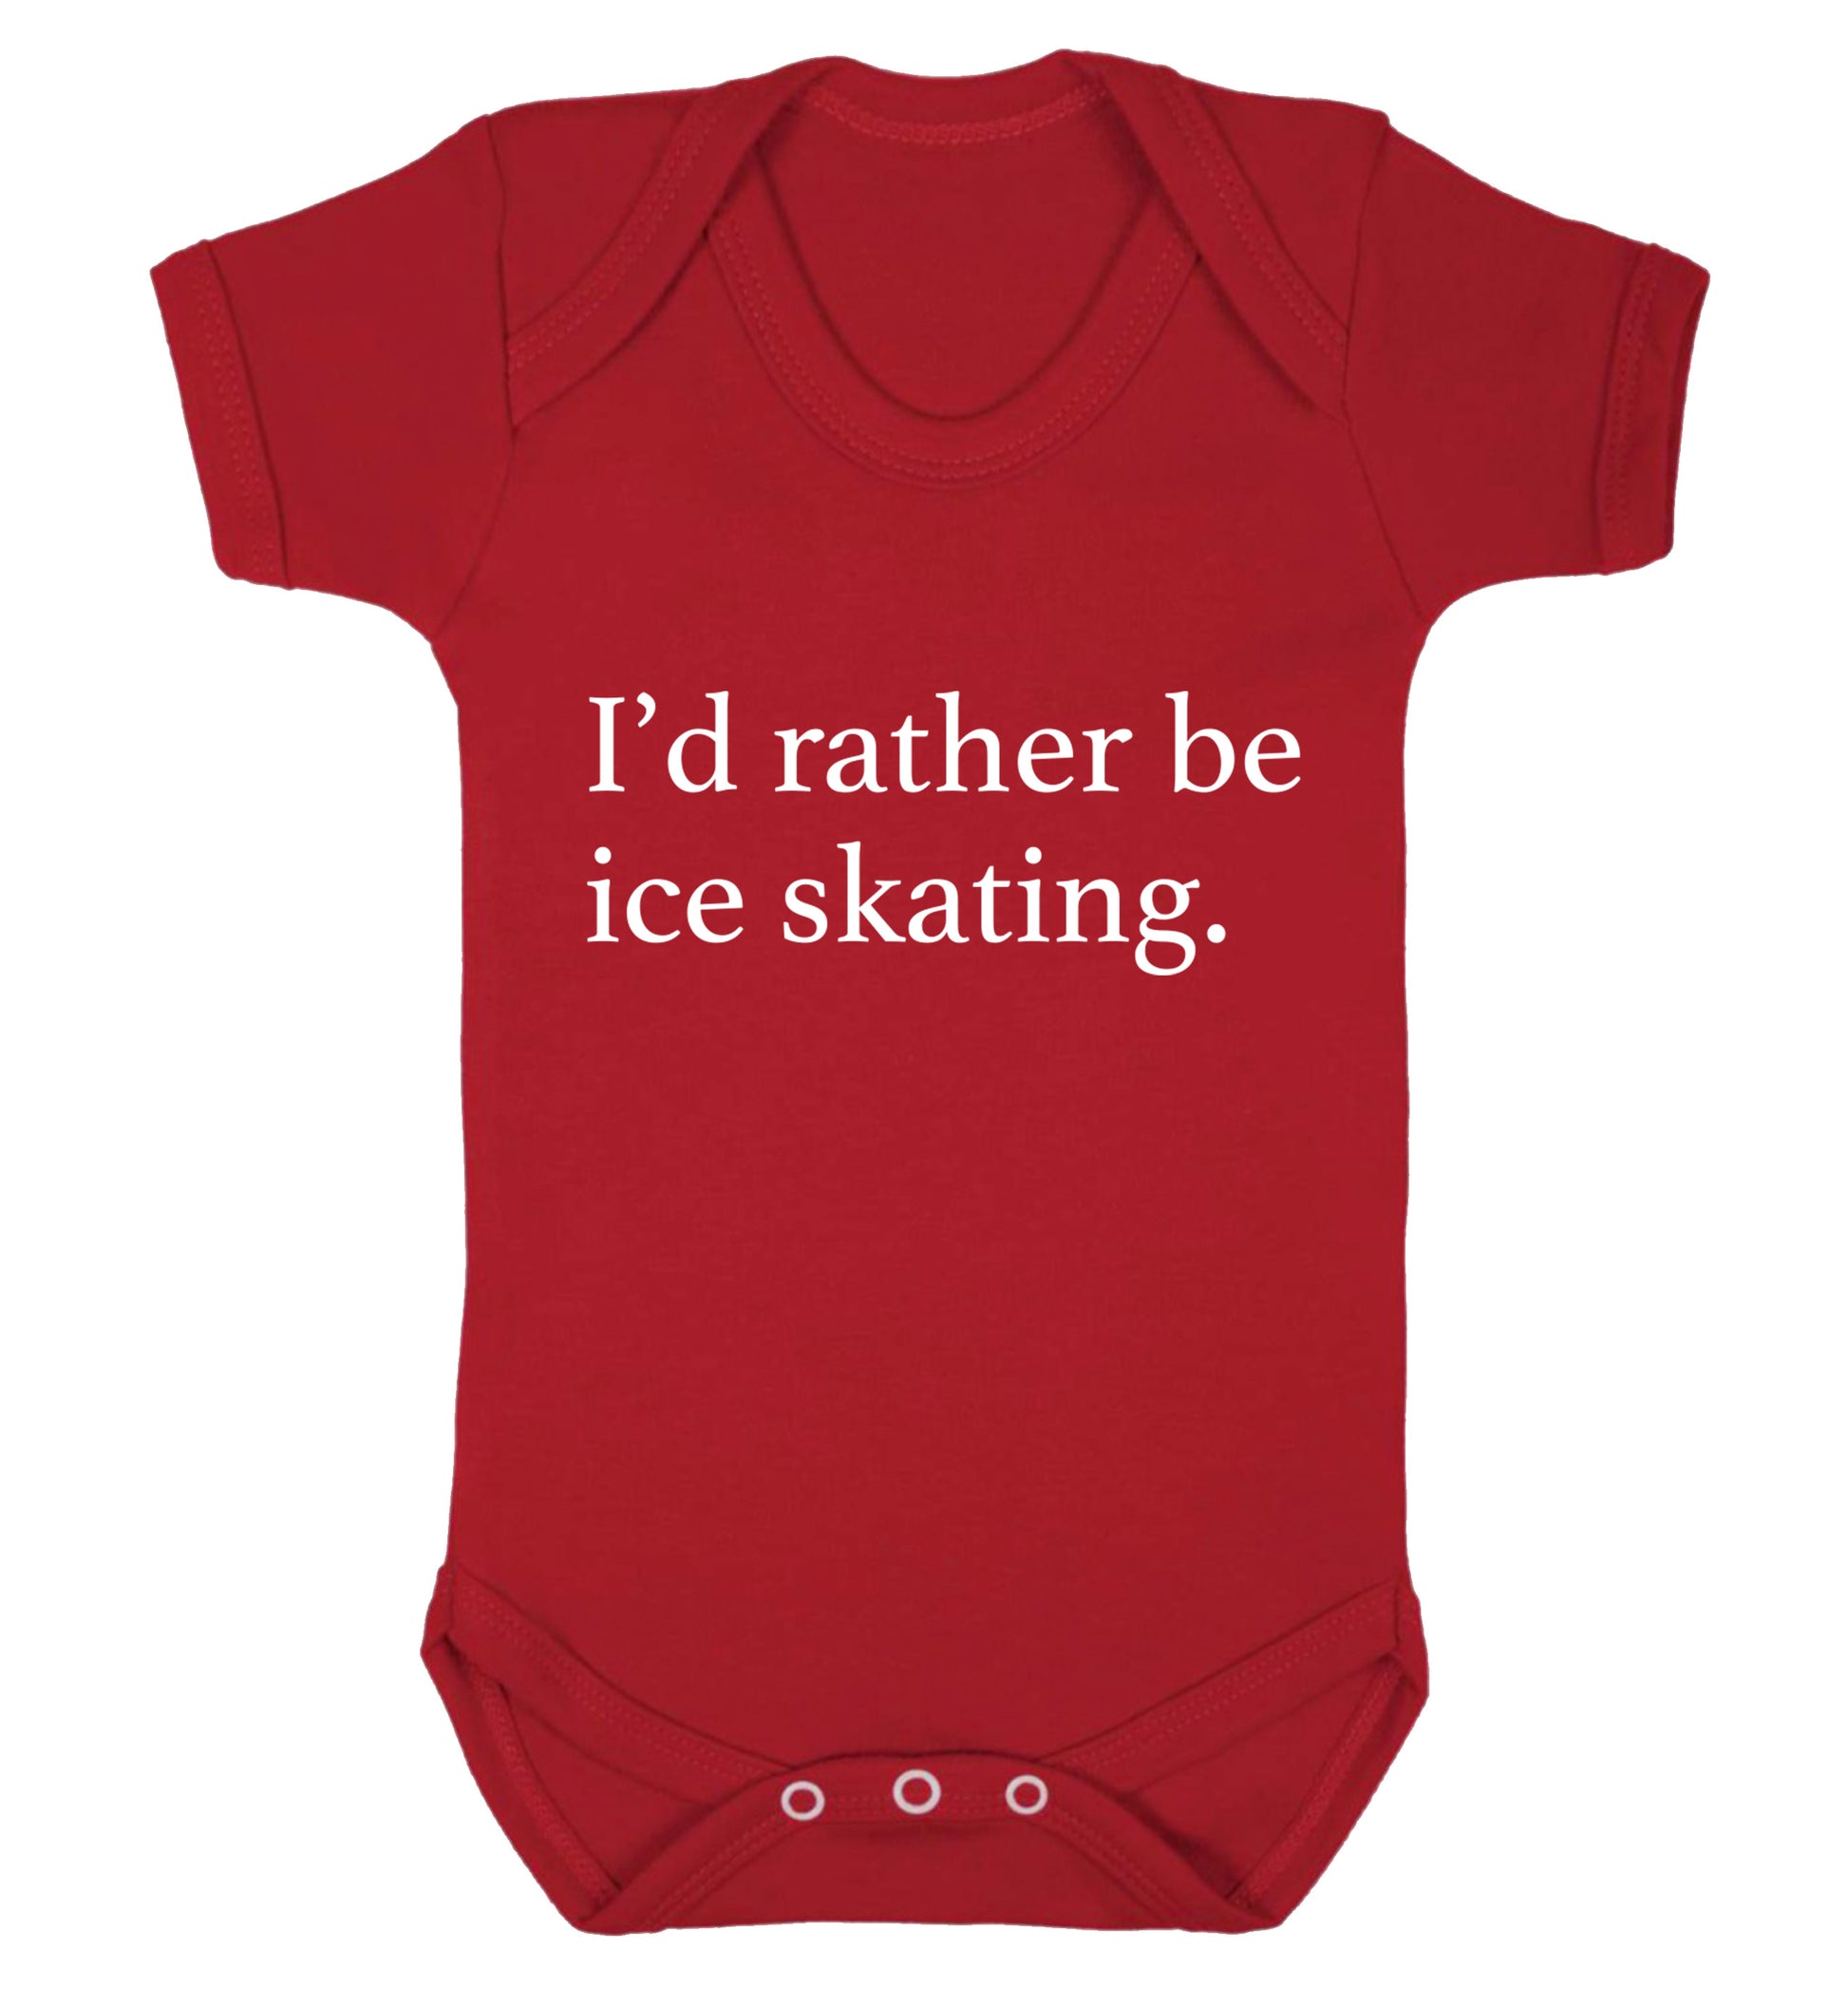 I'd rather be ice skating Baby Vest red 18-24 months